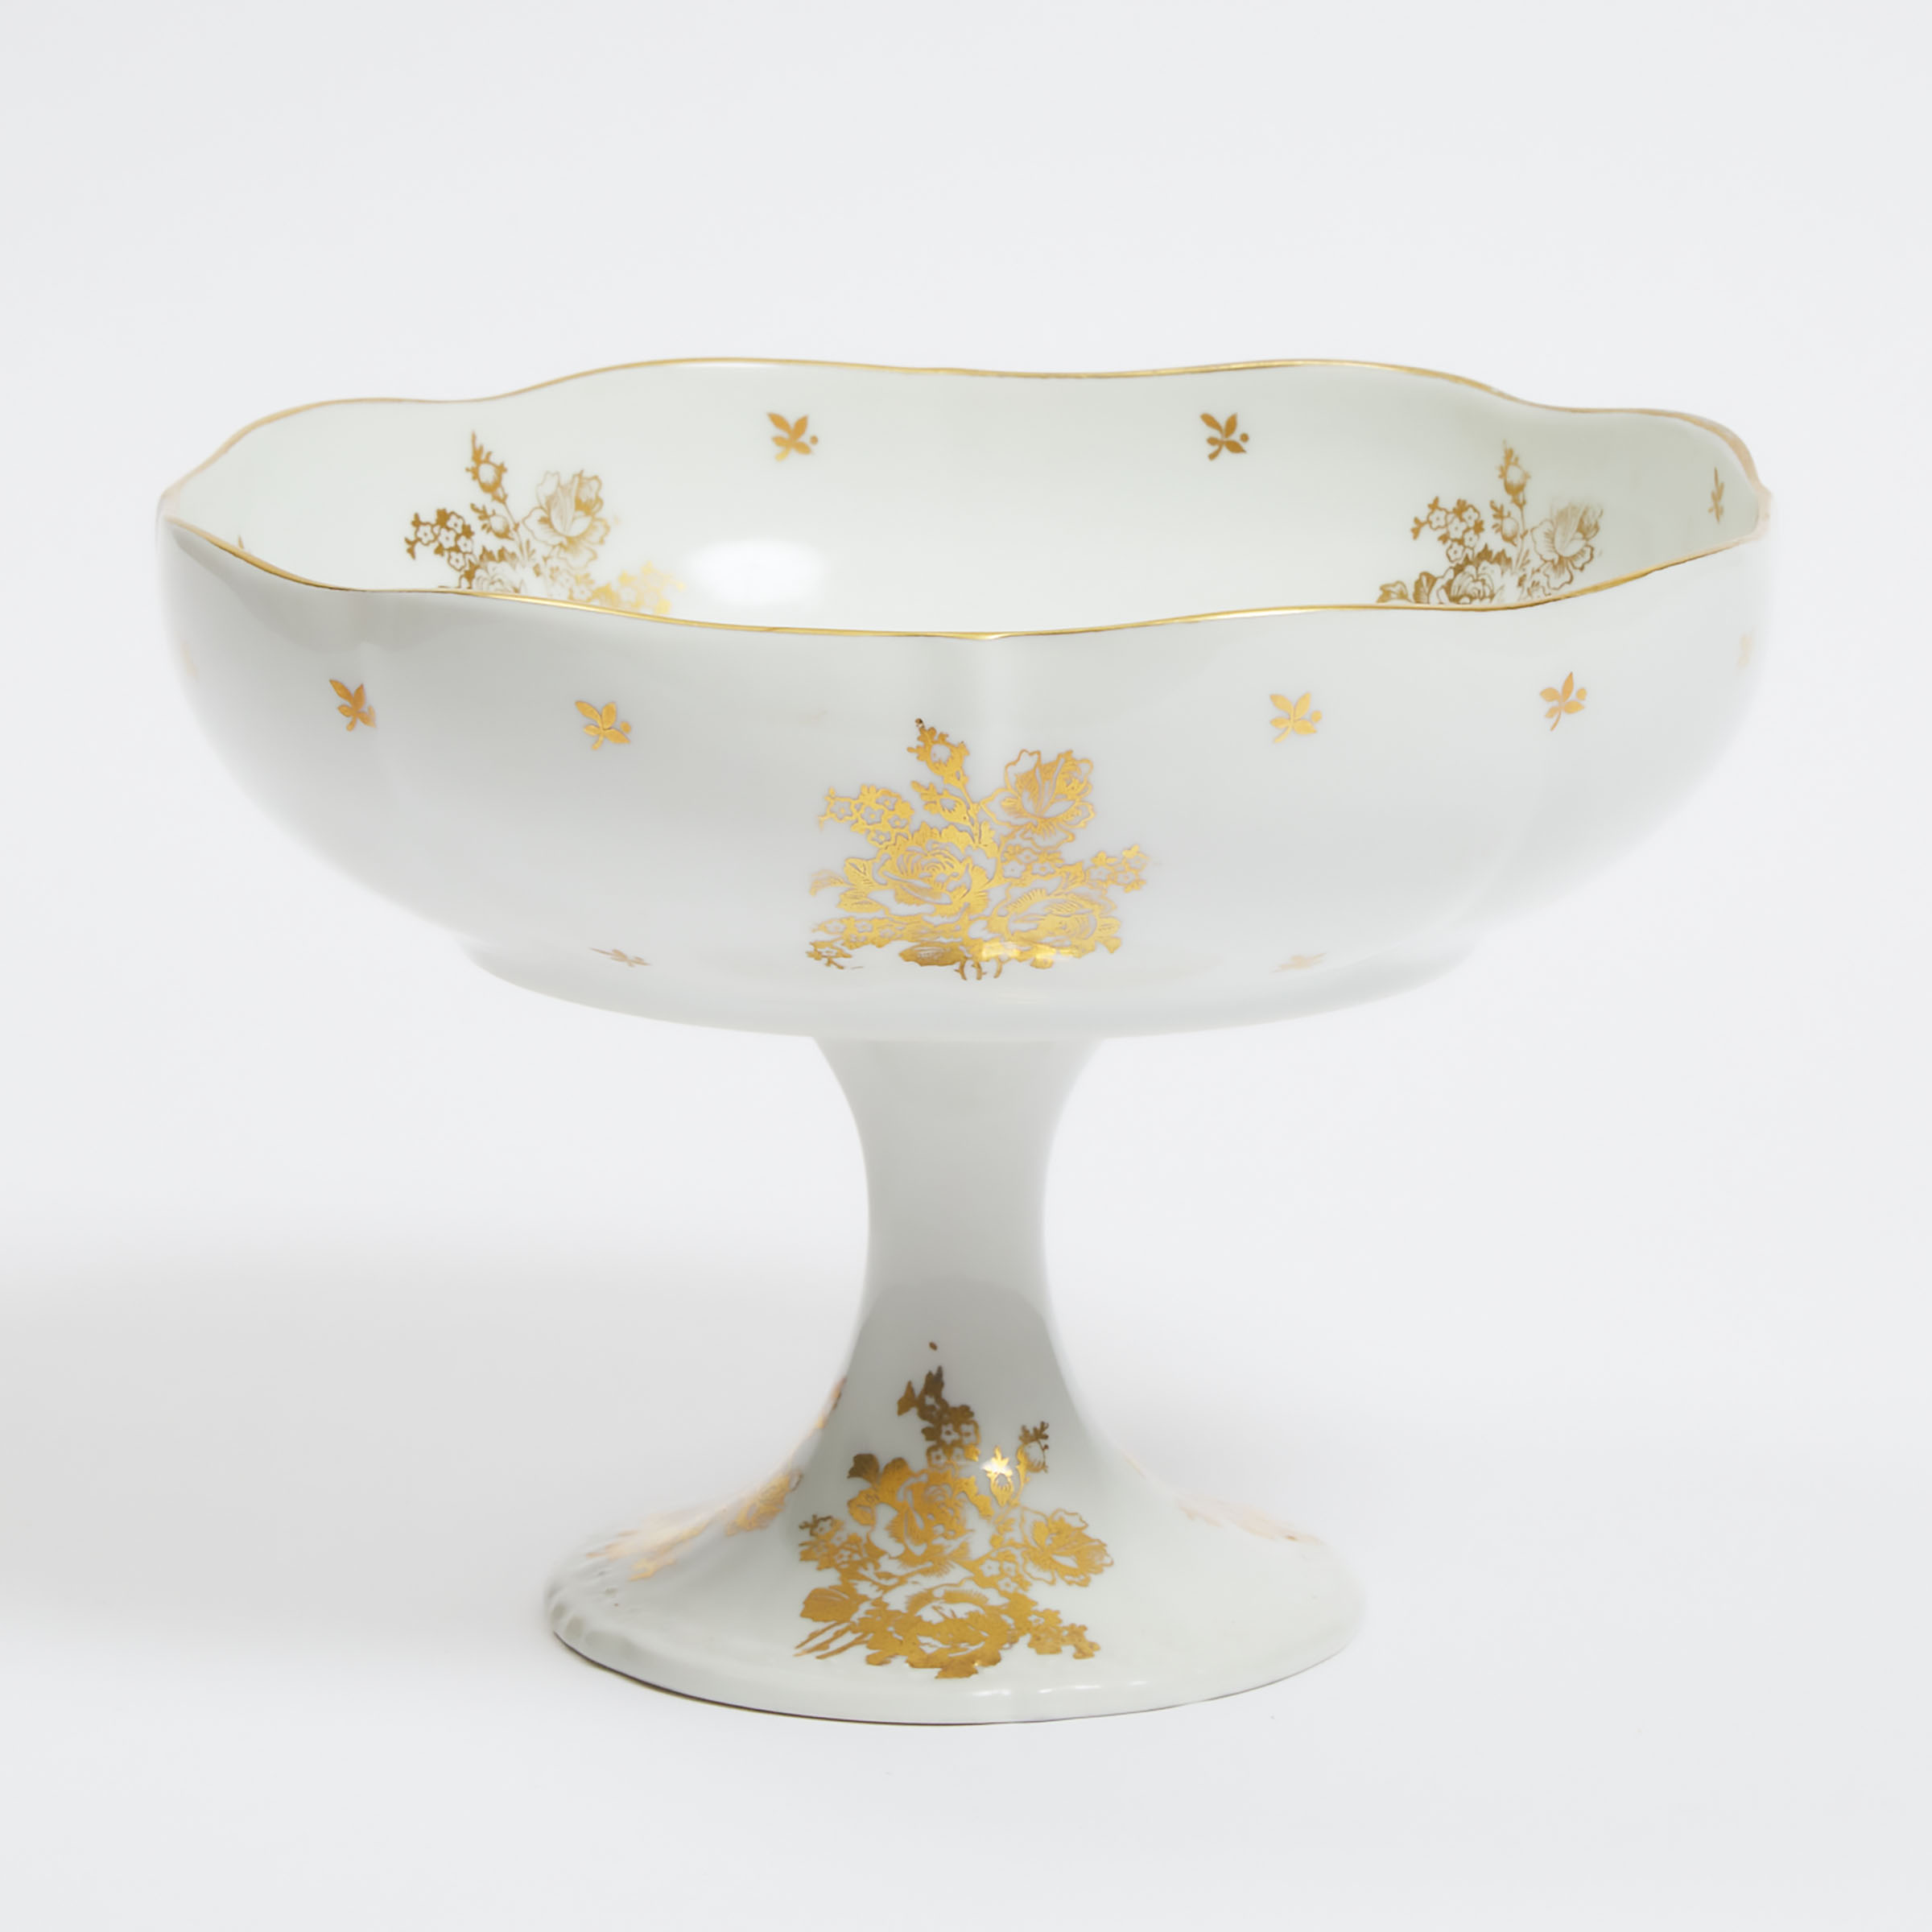 French Porcelain Pedestal Footed Comport, 20th century